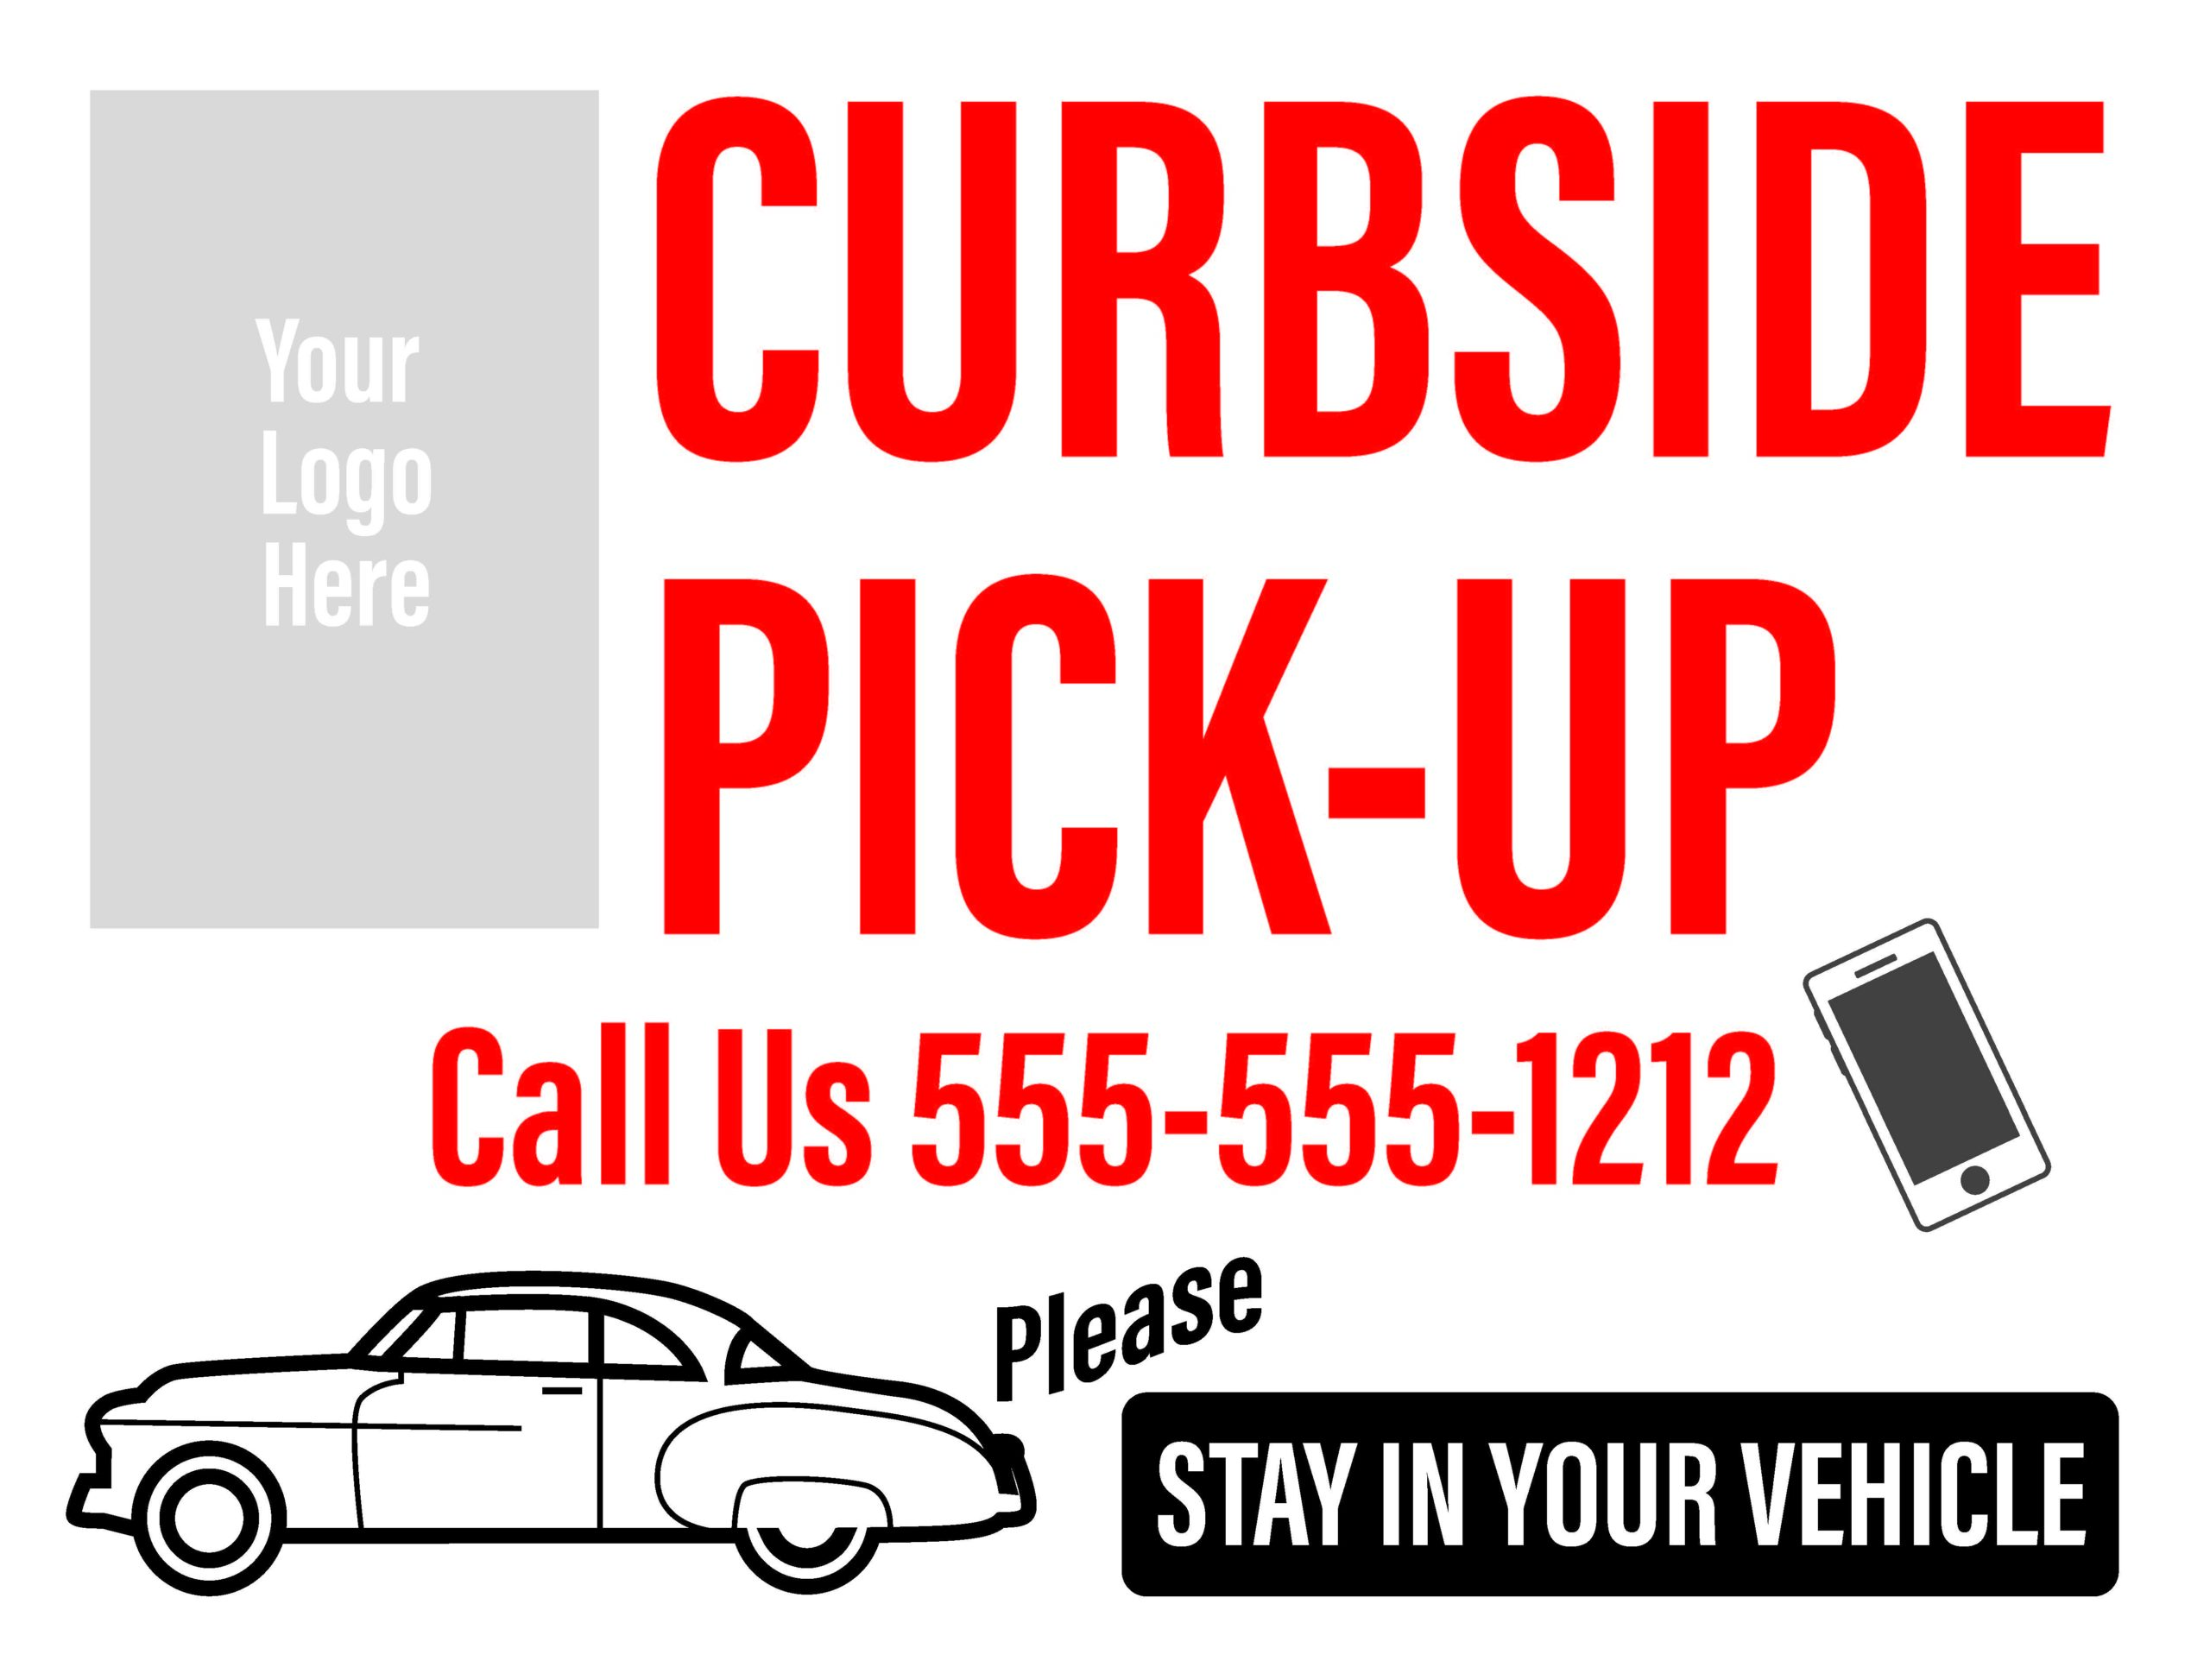 Curbside Pickup Signs 24”x 18”, Single-side print on White Corrugated Plastic with 1 Wire Step Stake (exterior use)